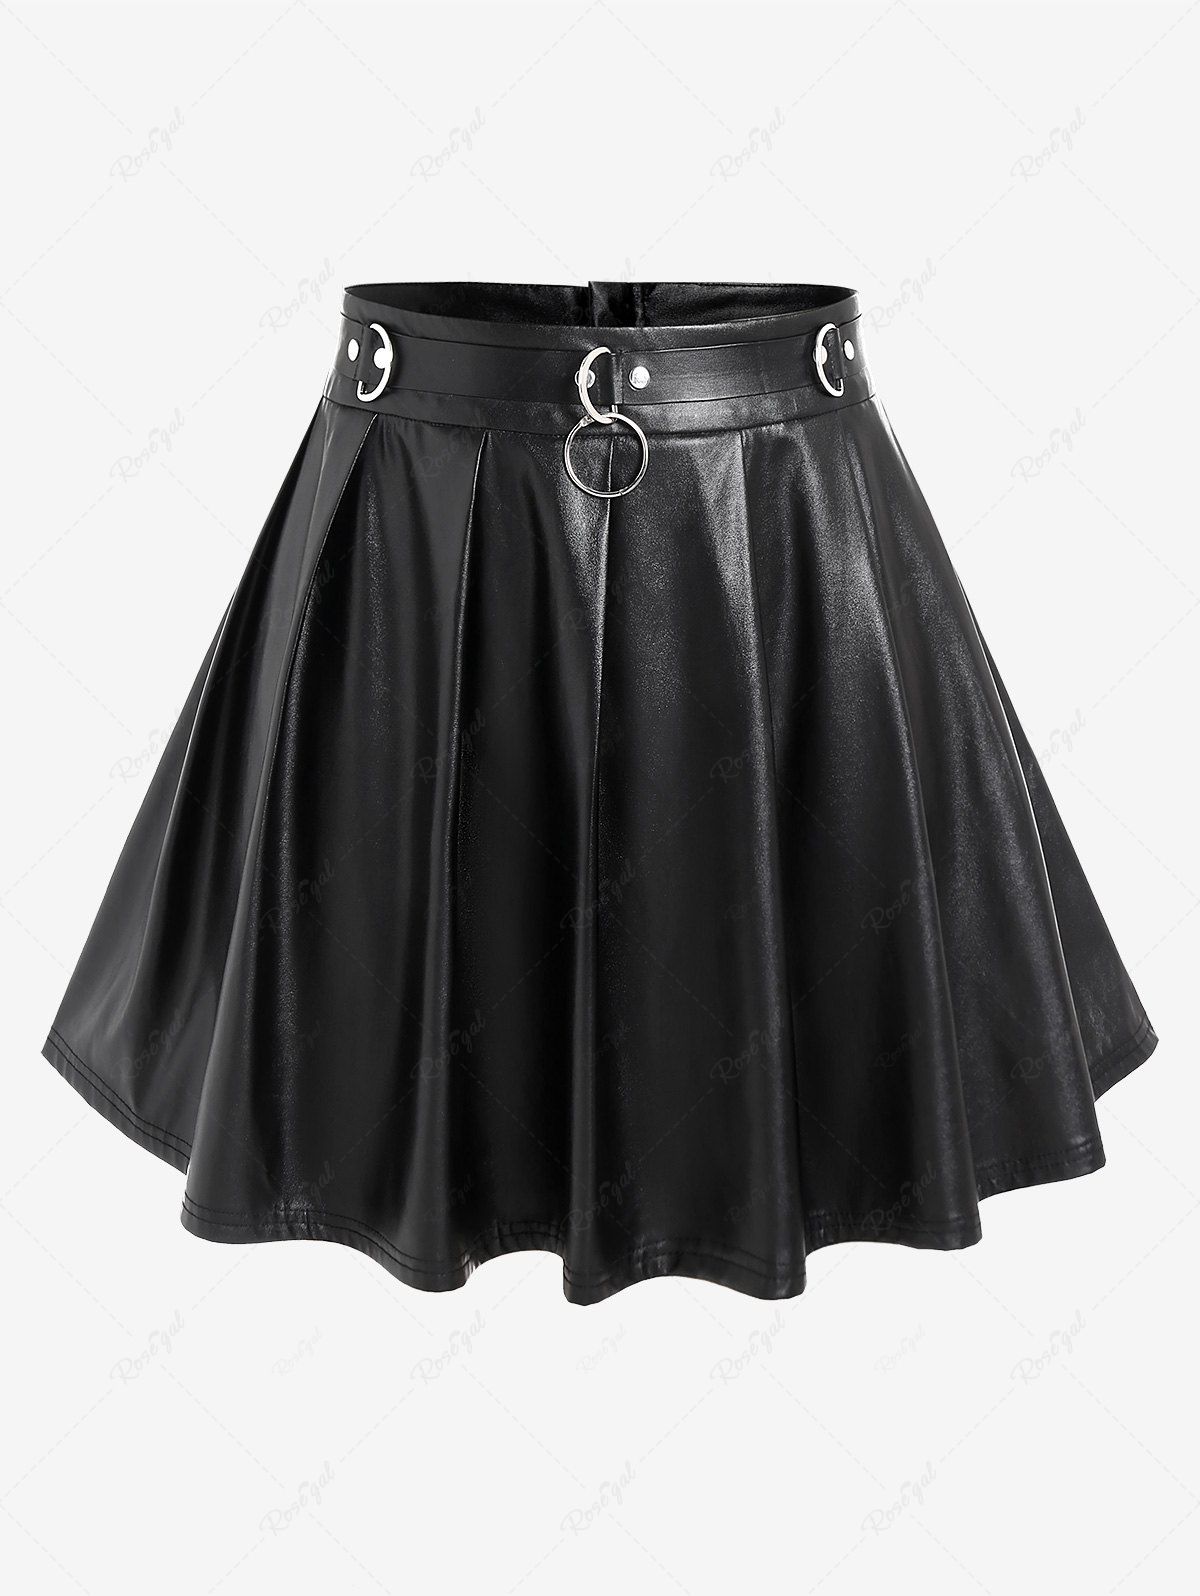 Chic Gothic D-rings Faux Leather Pleated Mini Skirt  